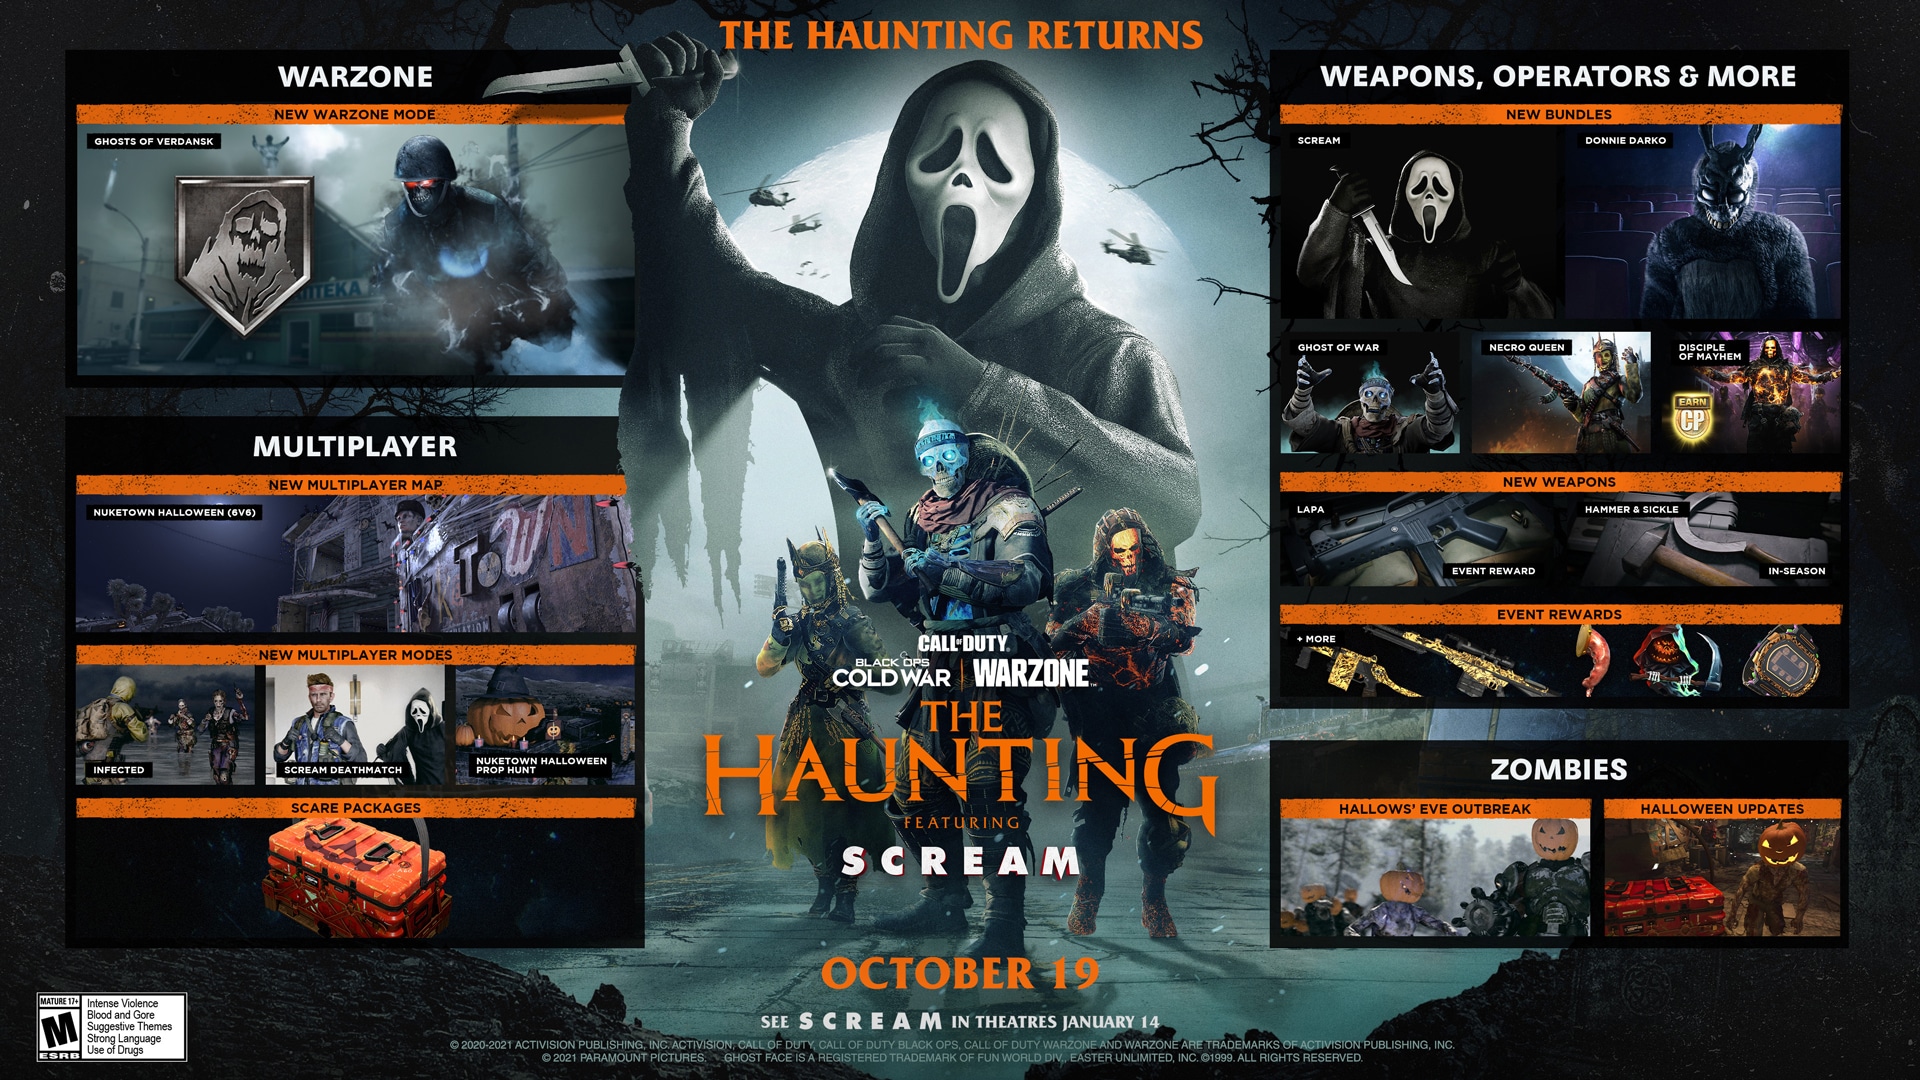 COD Warzone The Haunting Bundle Announced Featuring SCREAM and Donnie Darko